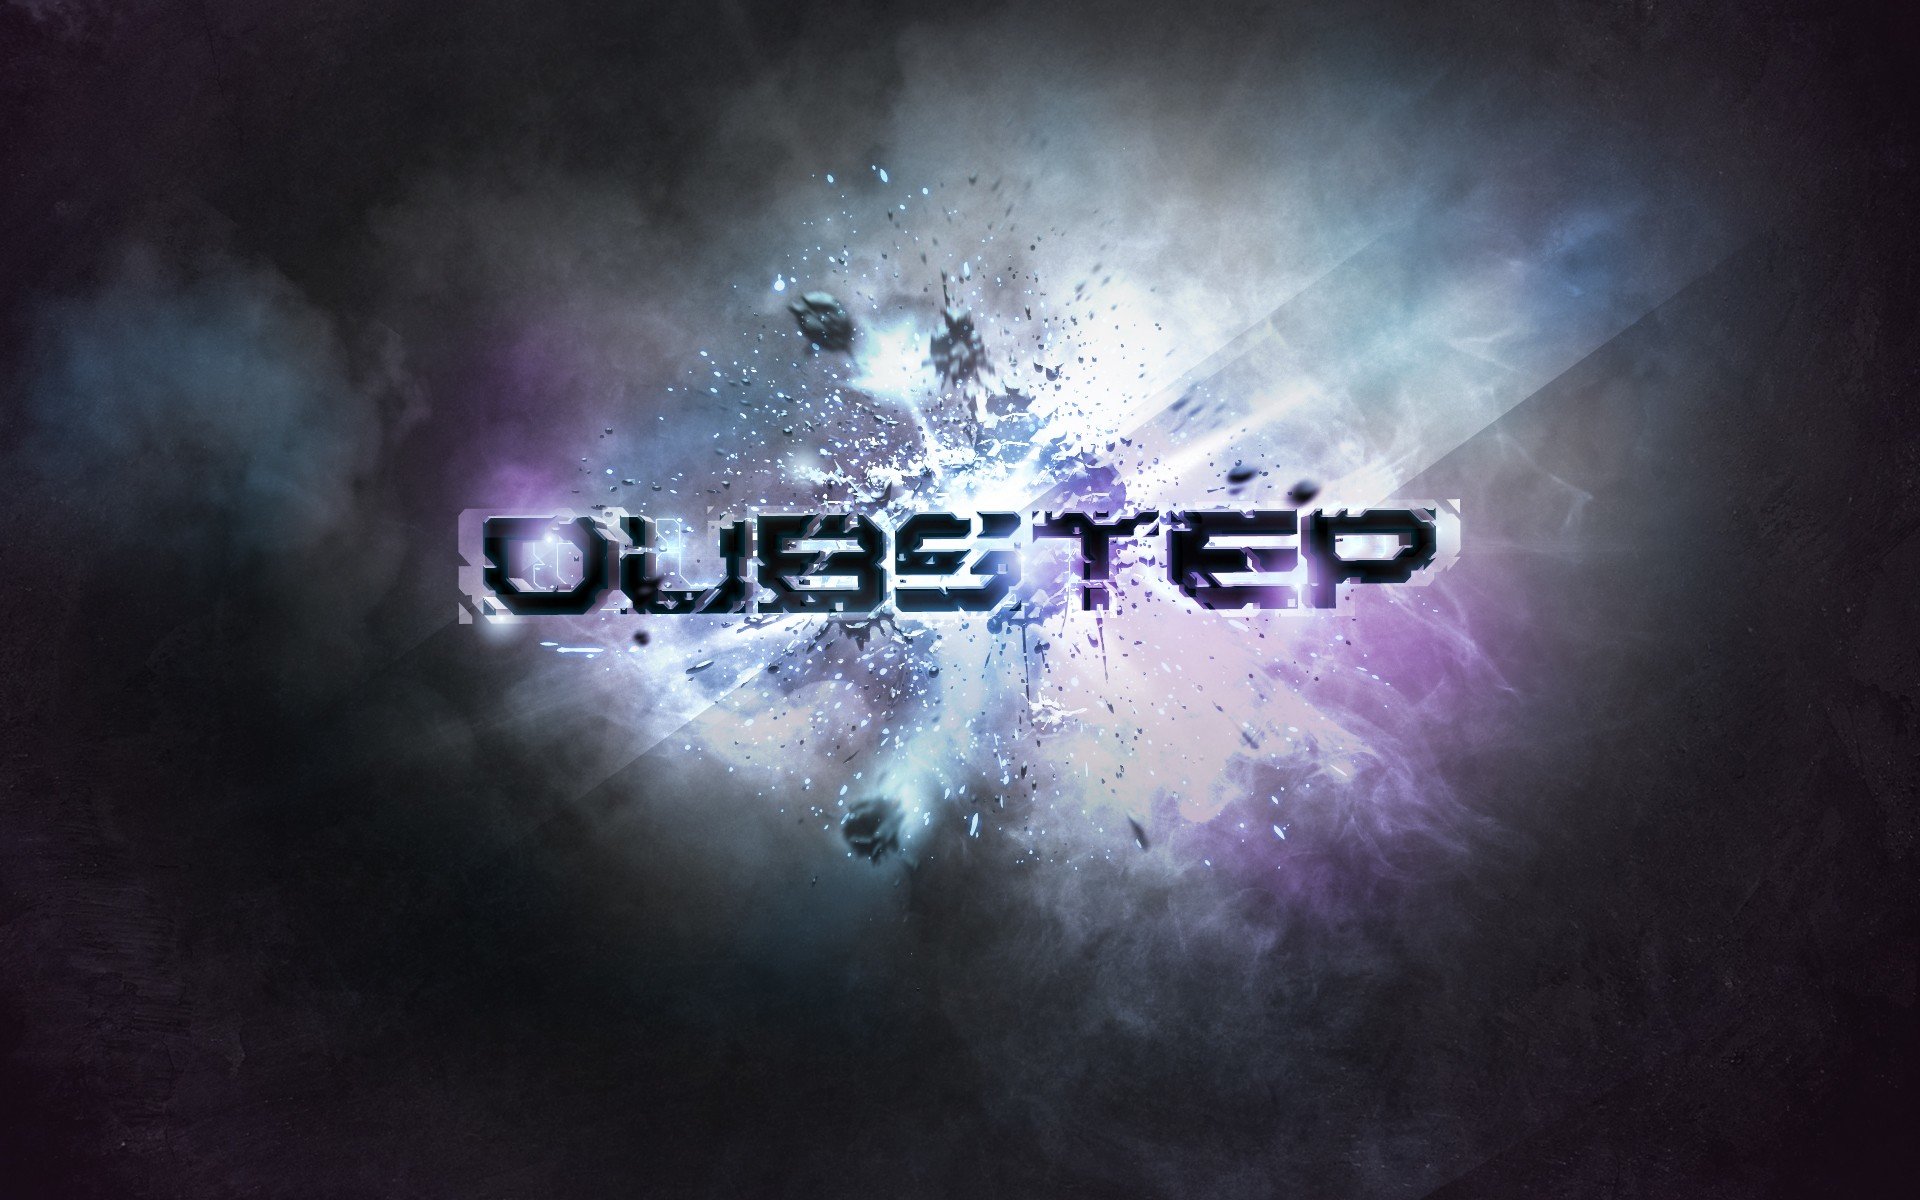 Awesome Dubstep free wallpaper ID:11189 for hd 1920x1200 desktop